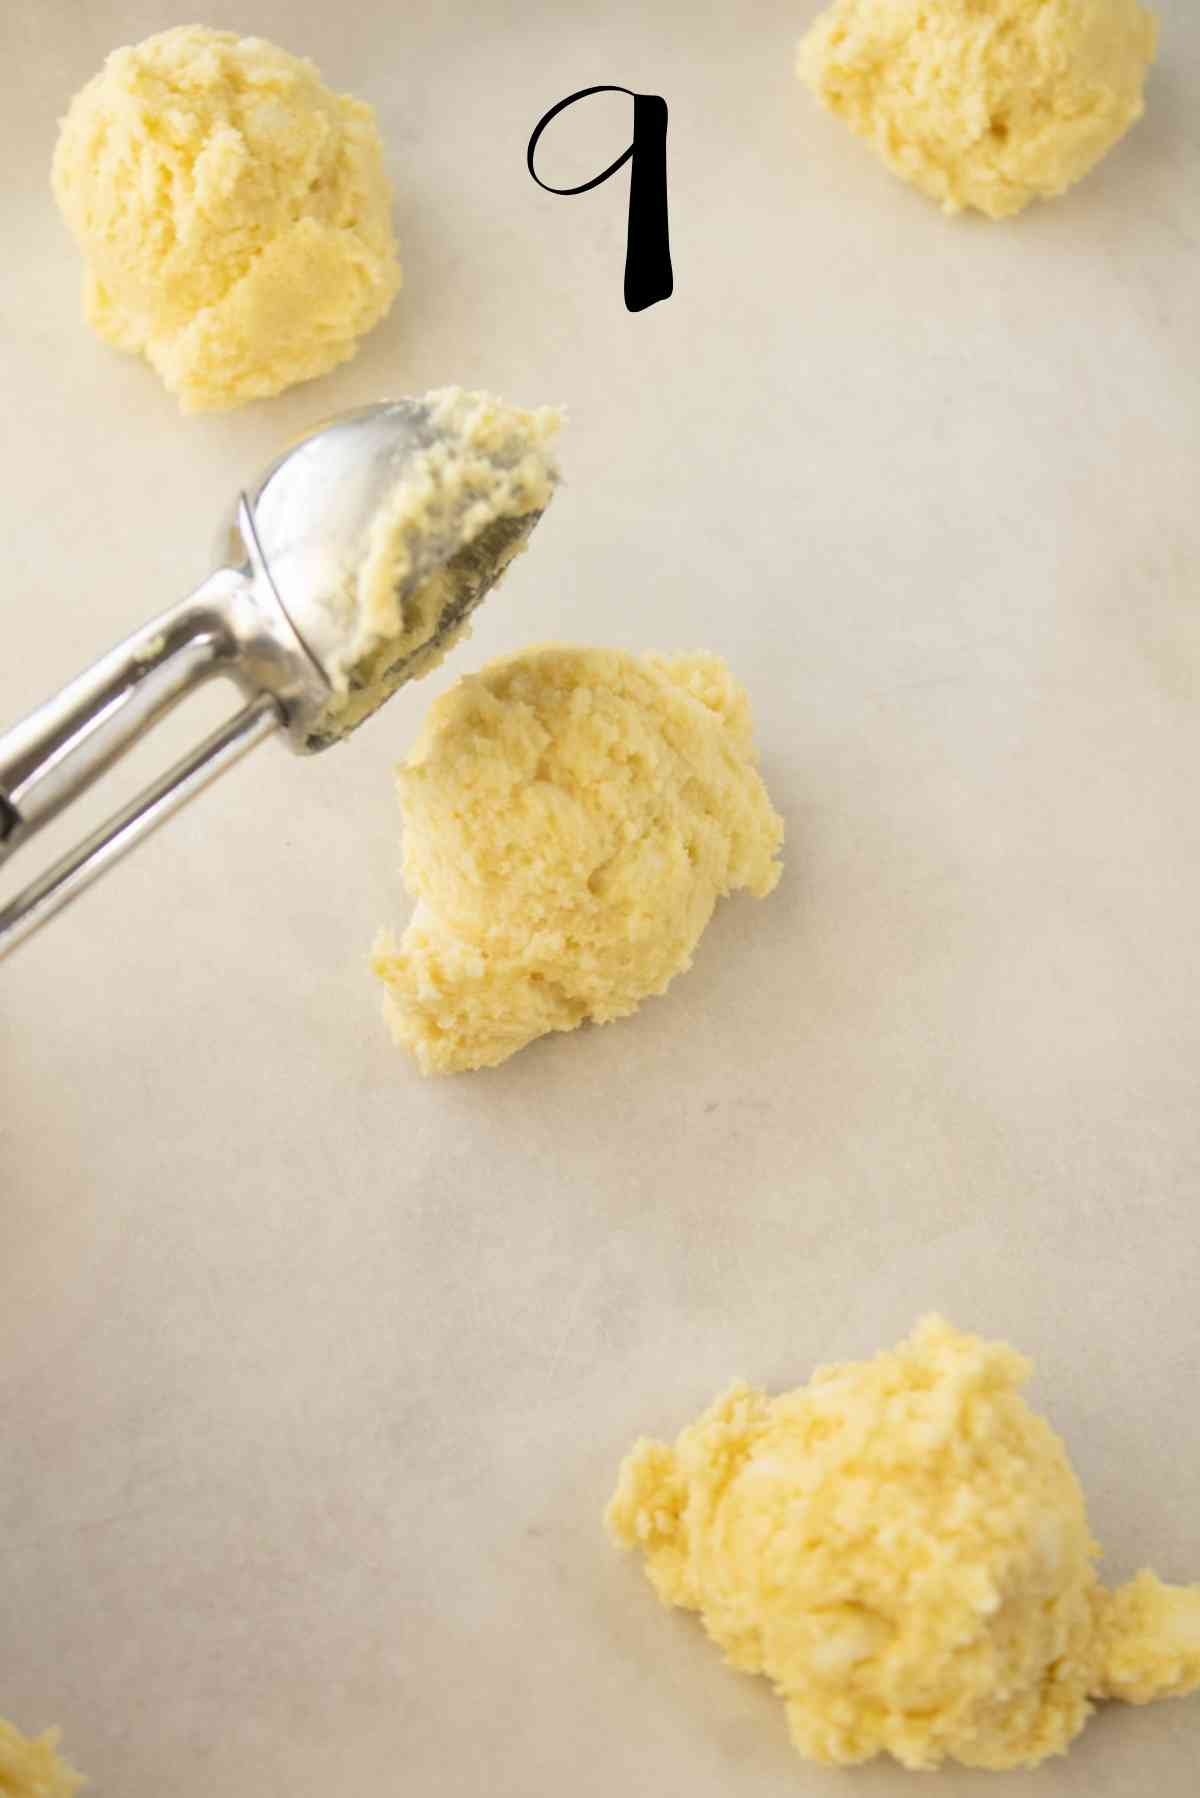 Place cookie dough balls on prepared cookie sheets and bake!